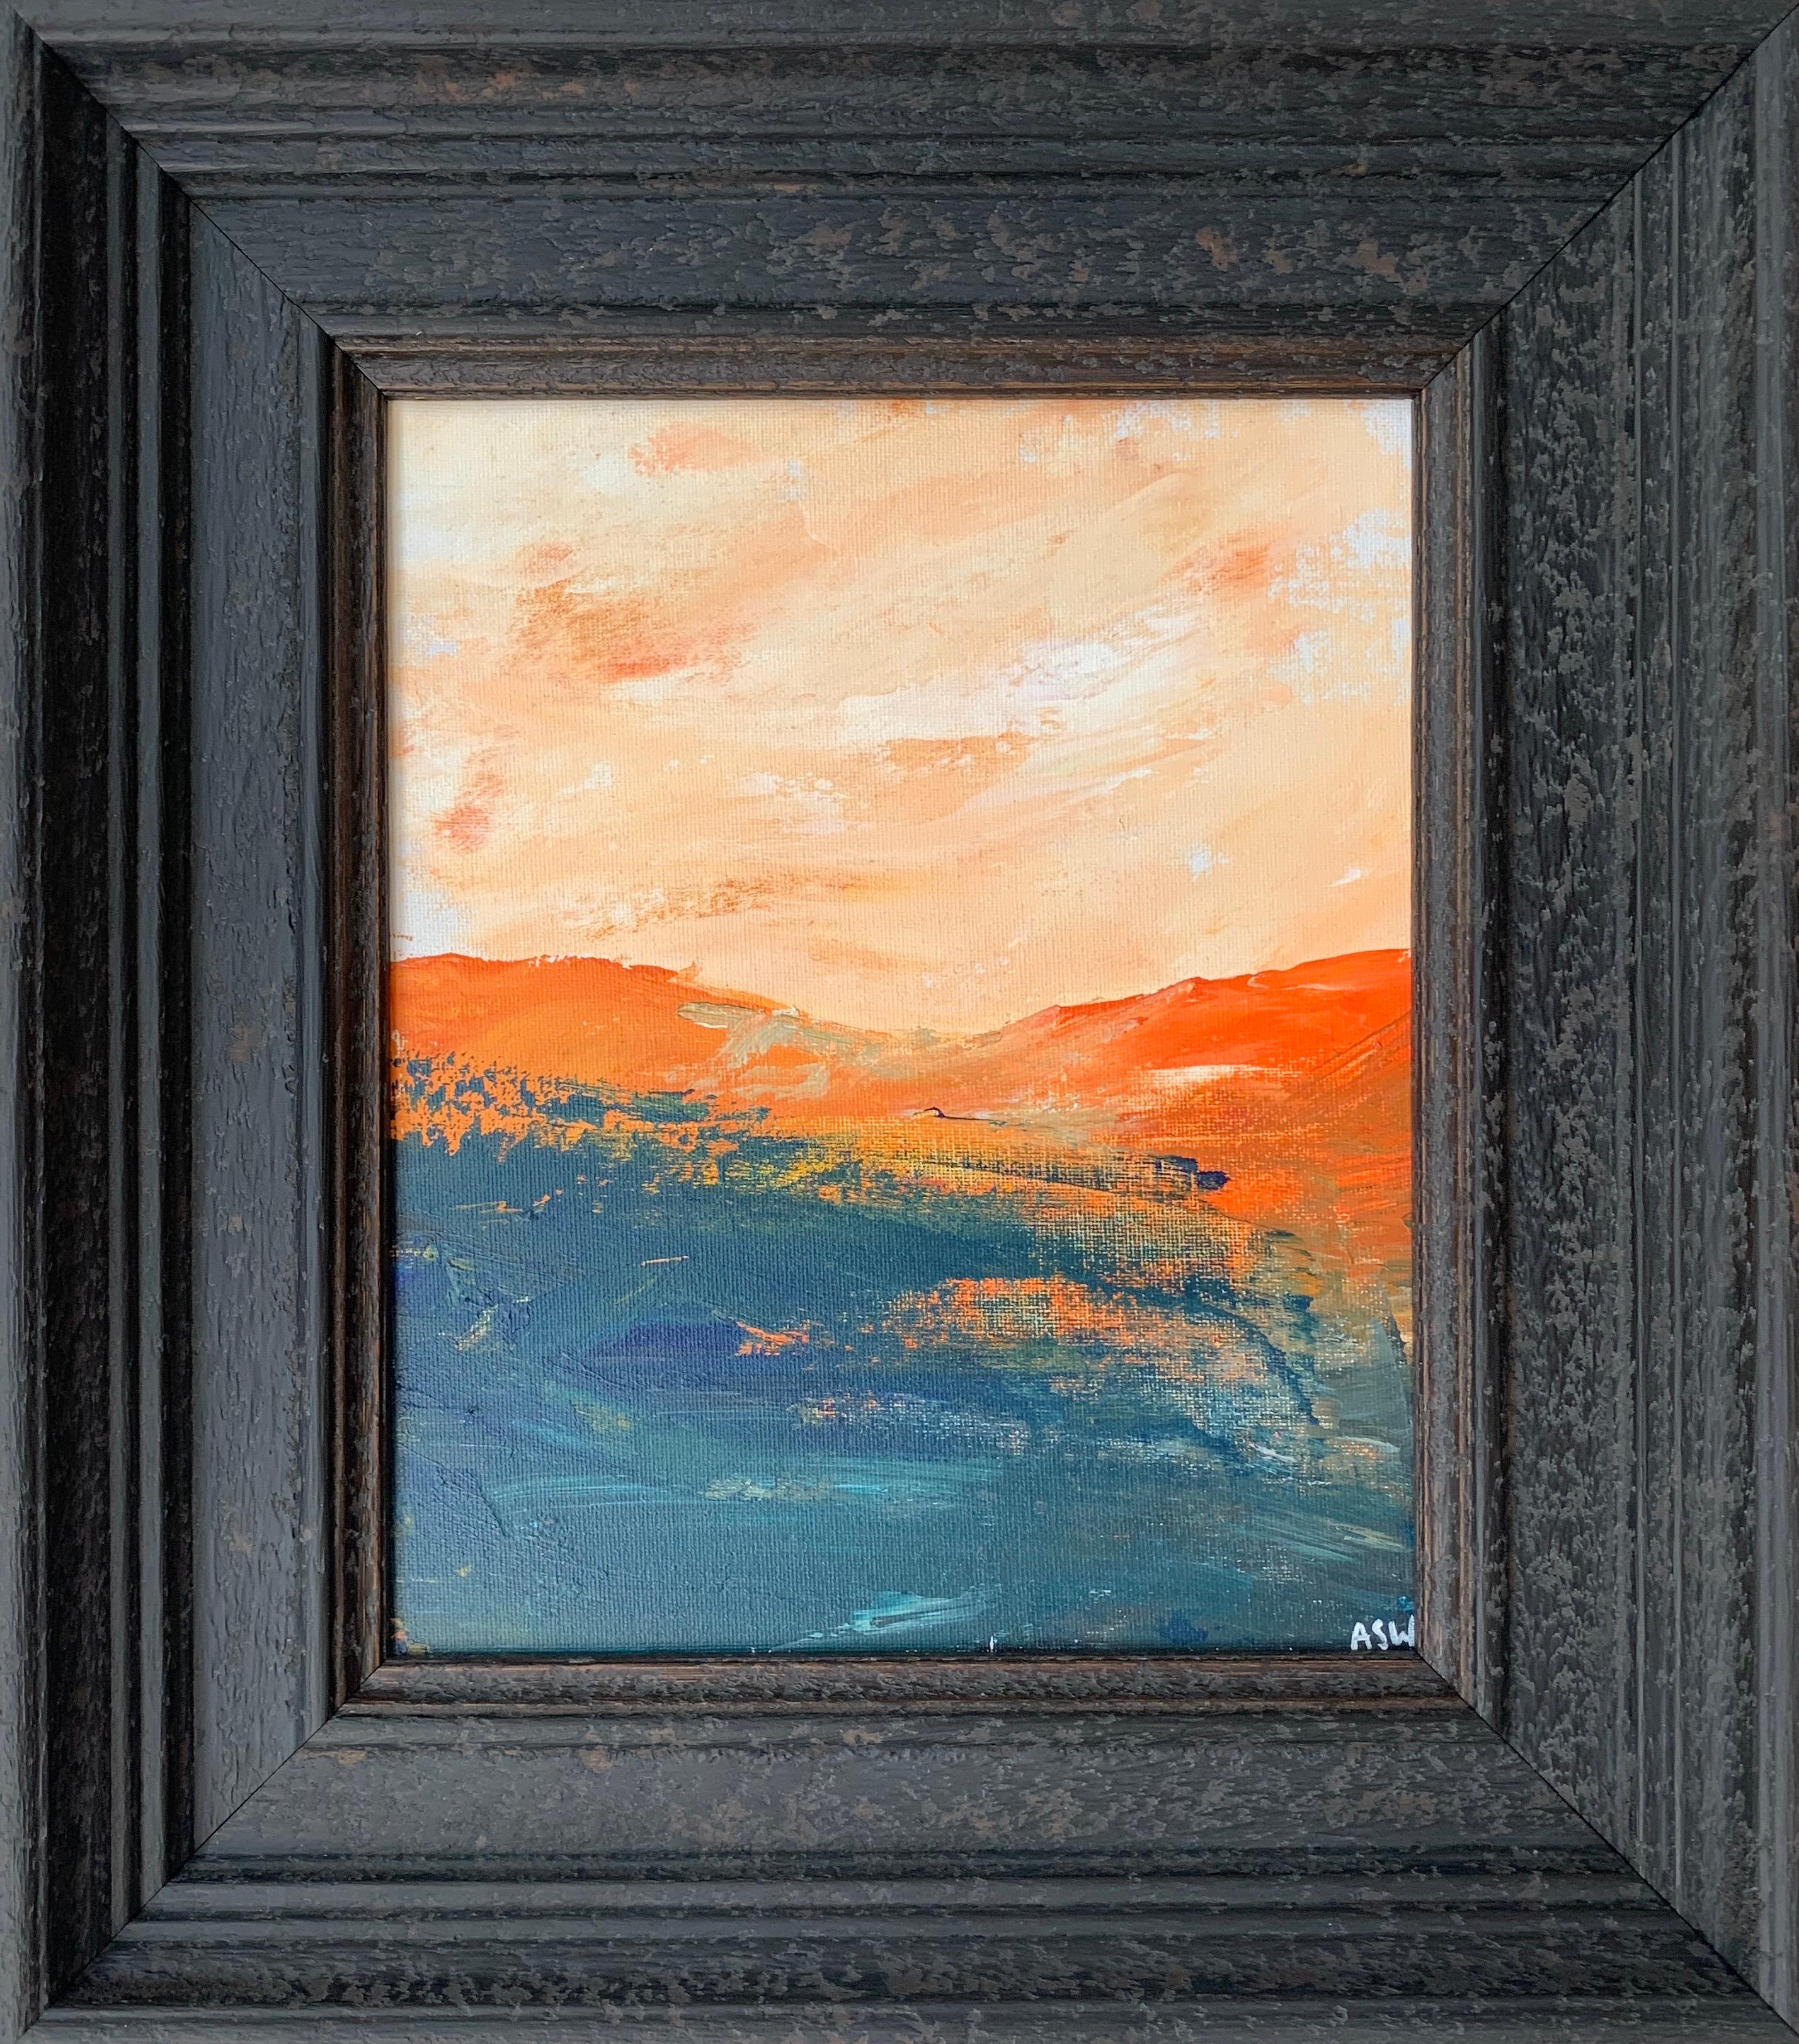 Angela Wakefield Landscape Painting - Abstract Orange & Black Mountain Landscape Study by Contemporary British Artist